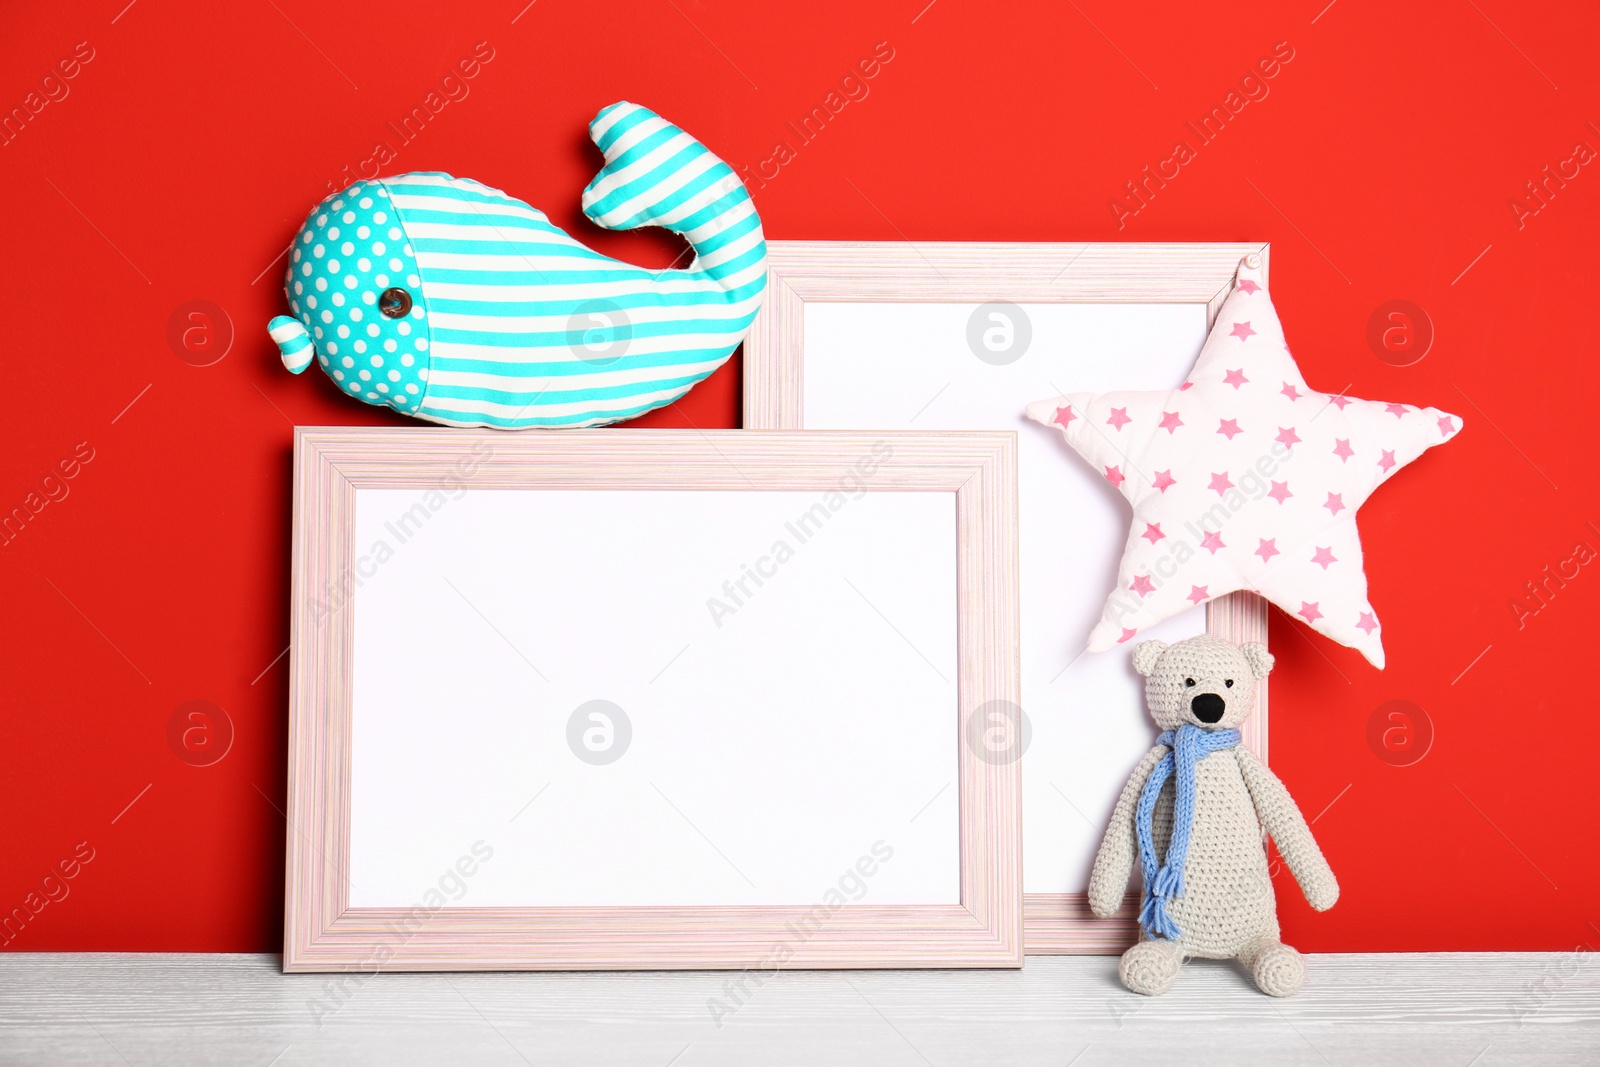 Photo of Soft toys and photo frames on table against red background, space for text. Child room interior